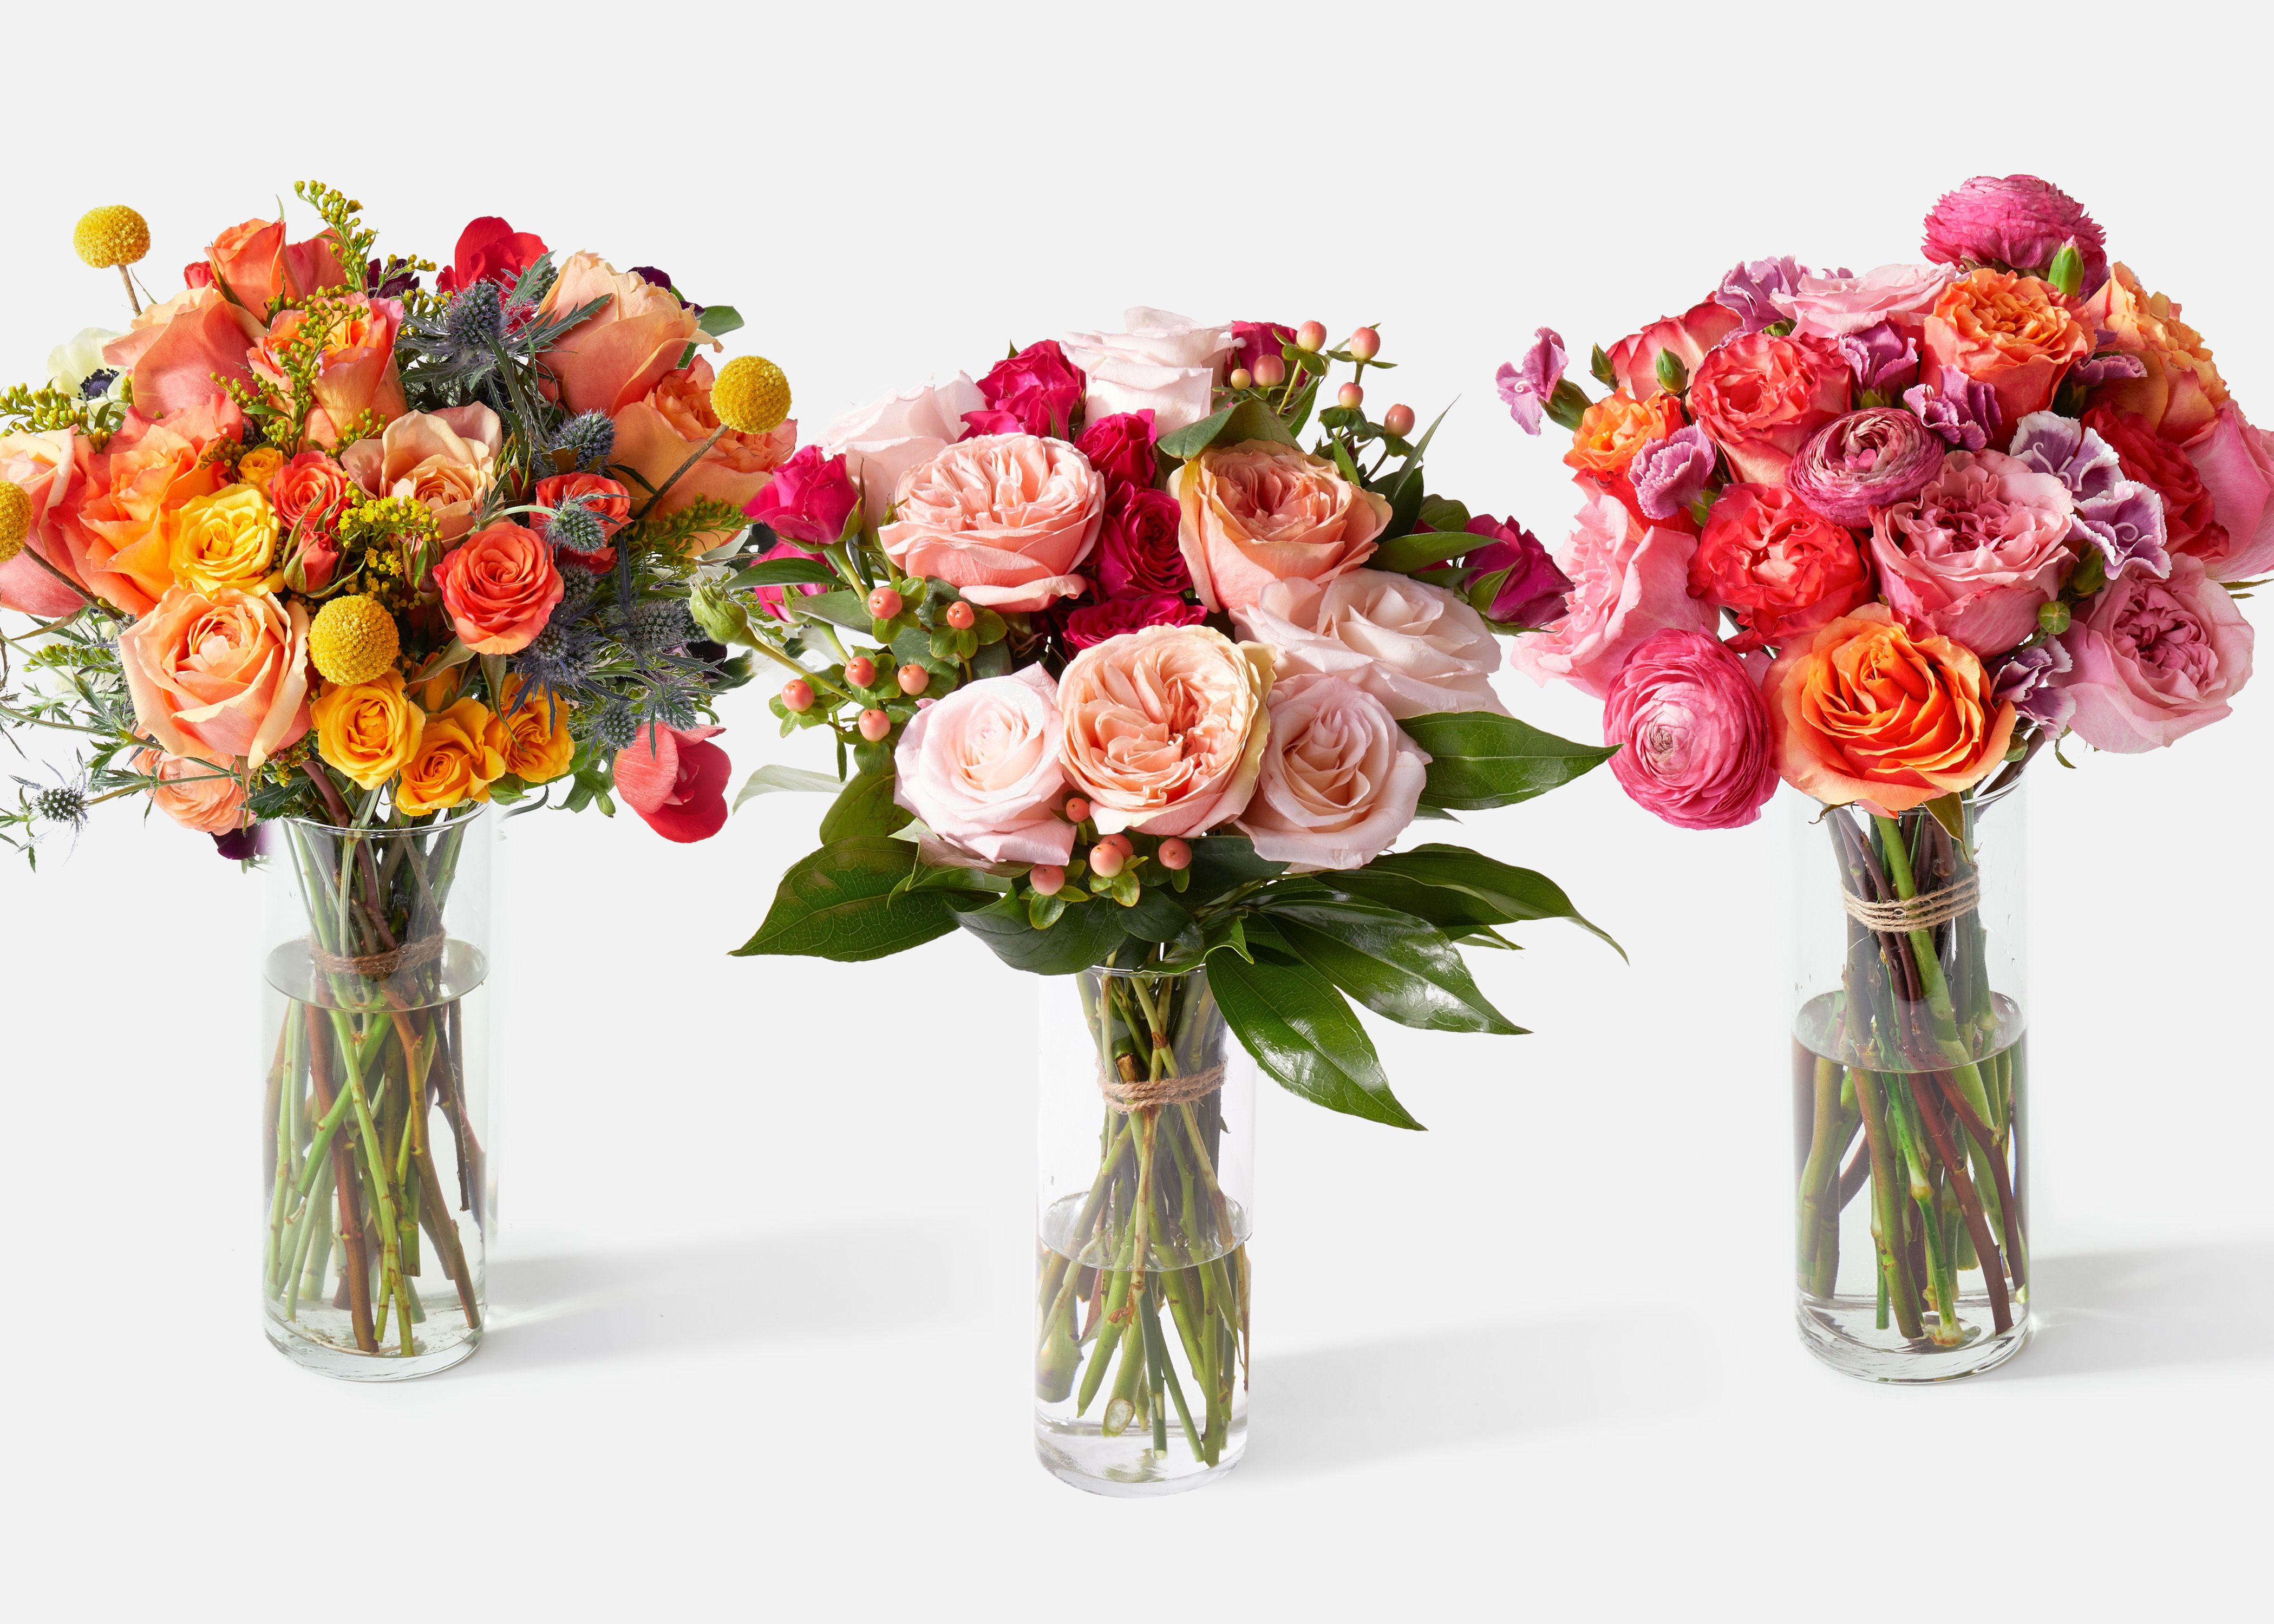 Don't forget to sign your name! | UrbanStems